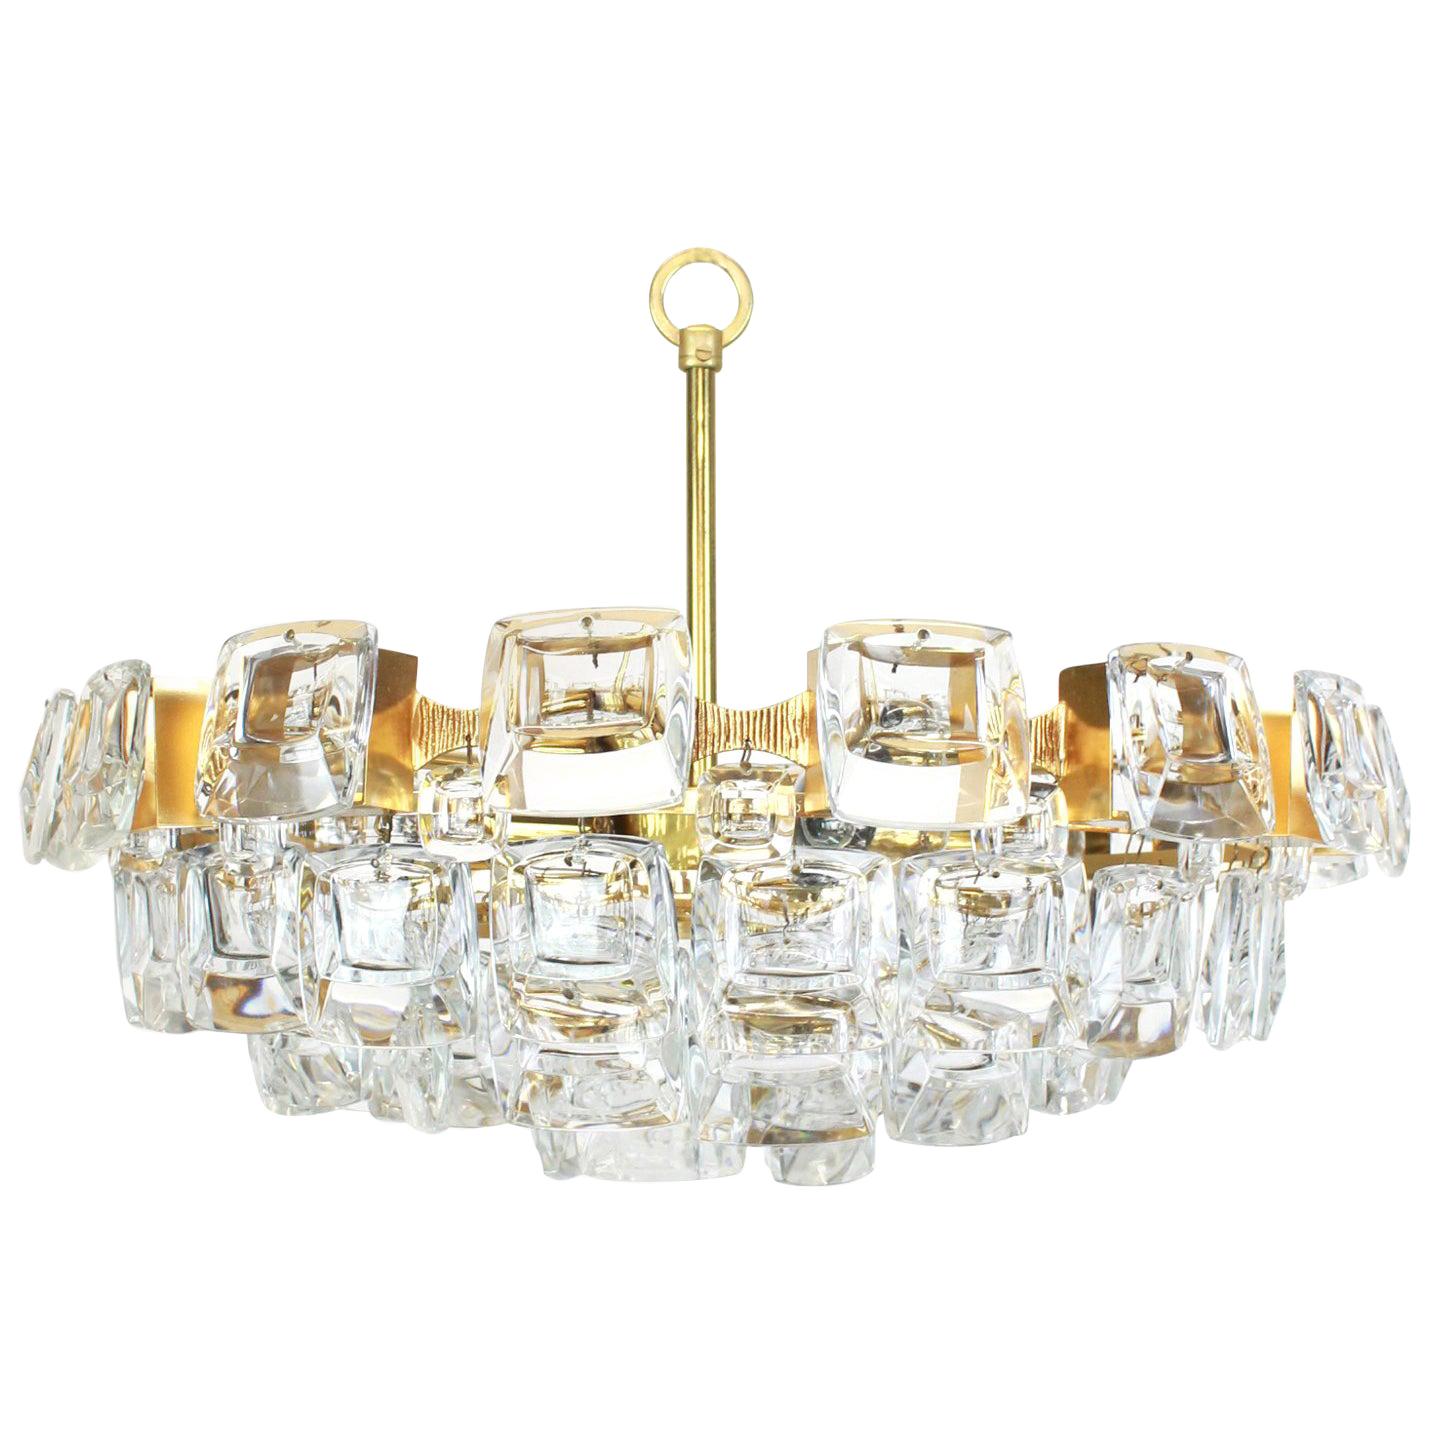 Large Gilt Brass and Crystal Glass Chandelier by Palwa, Germany, 1960s For Sale